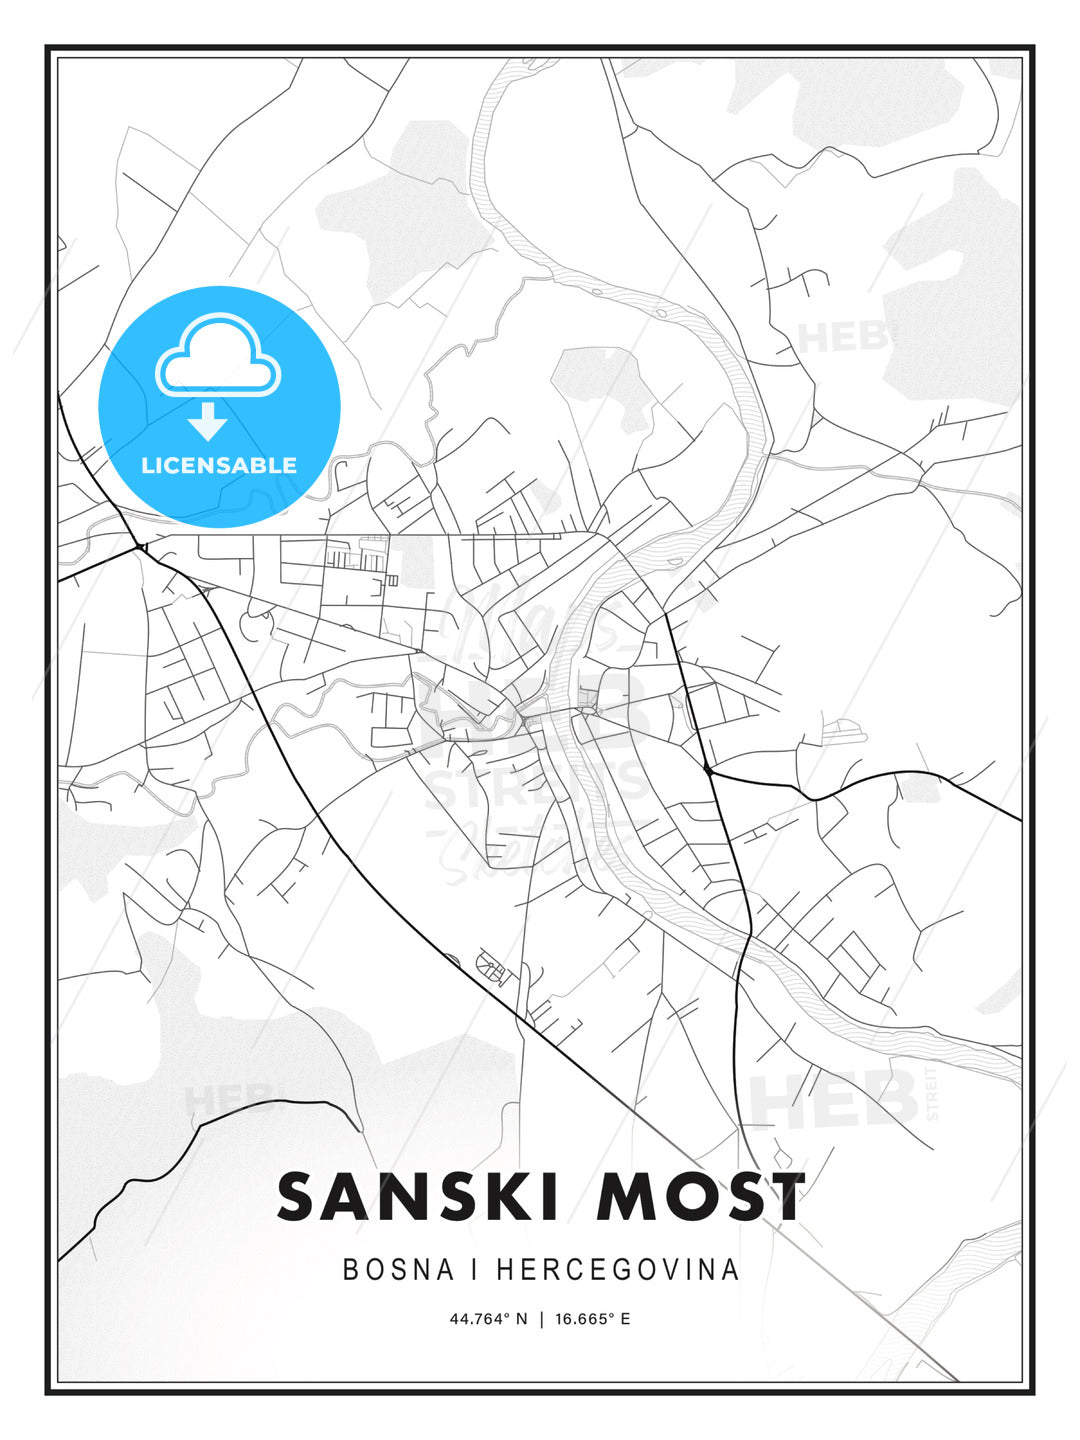 Sanski Most, Bosnia and Herzegovina, Modern Print Template in Various Formats - HEBSTREITS Sketches